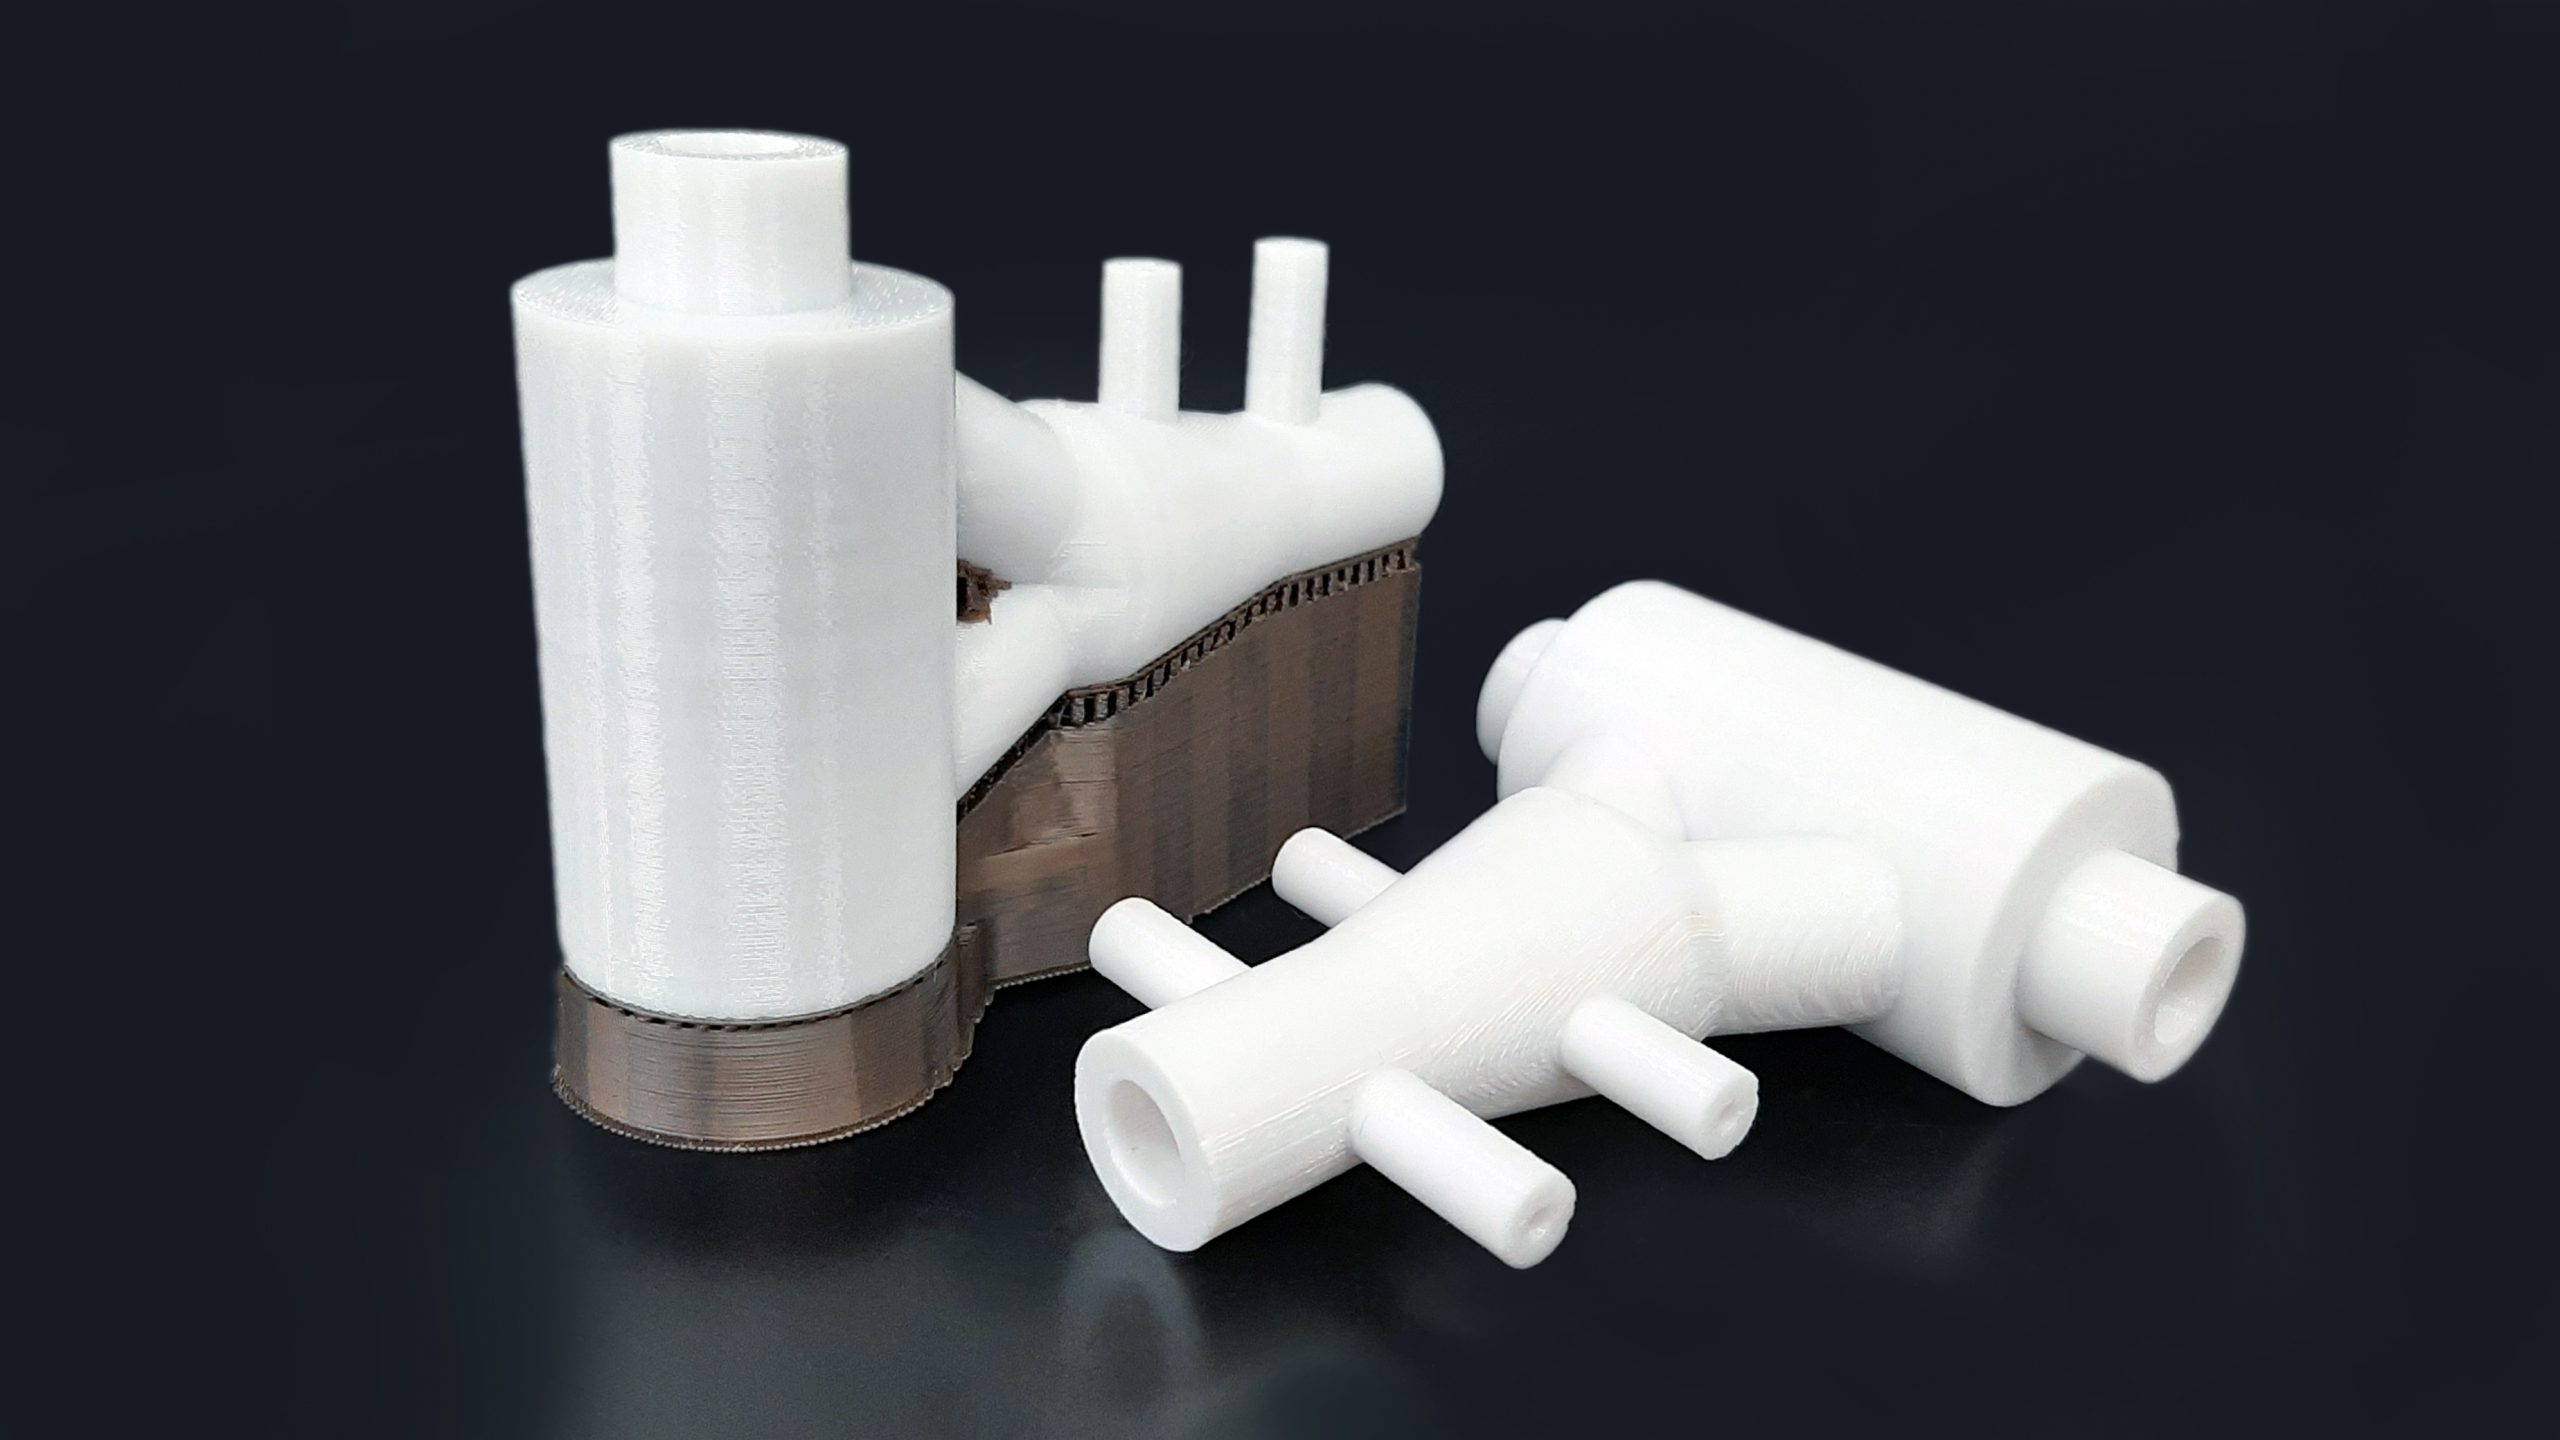 White FDM 3D printed parts, one before post-processing with brown support material and one after post-processing without brown support material.